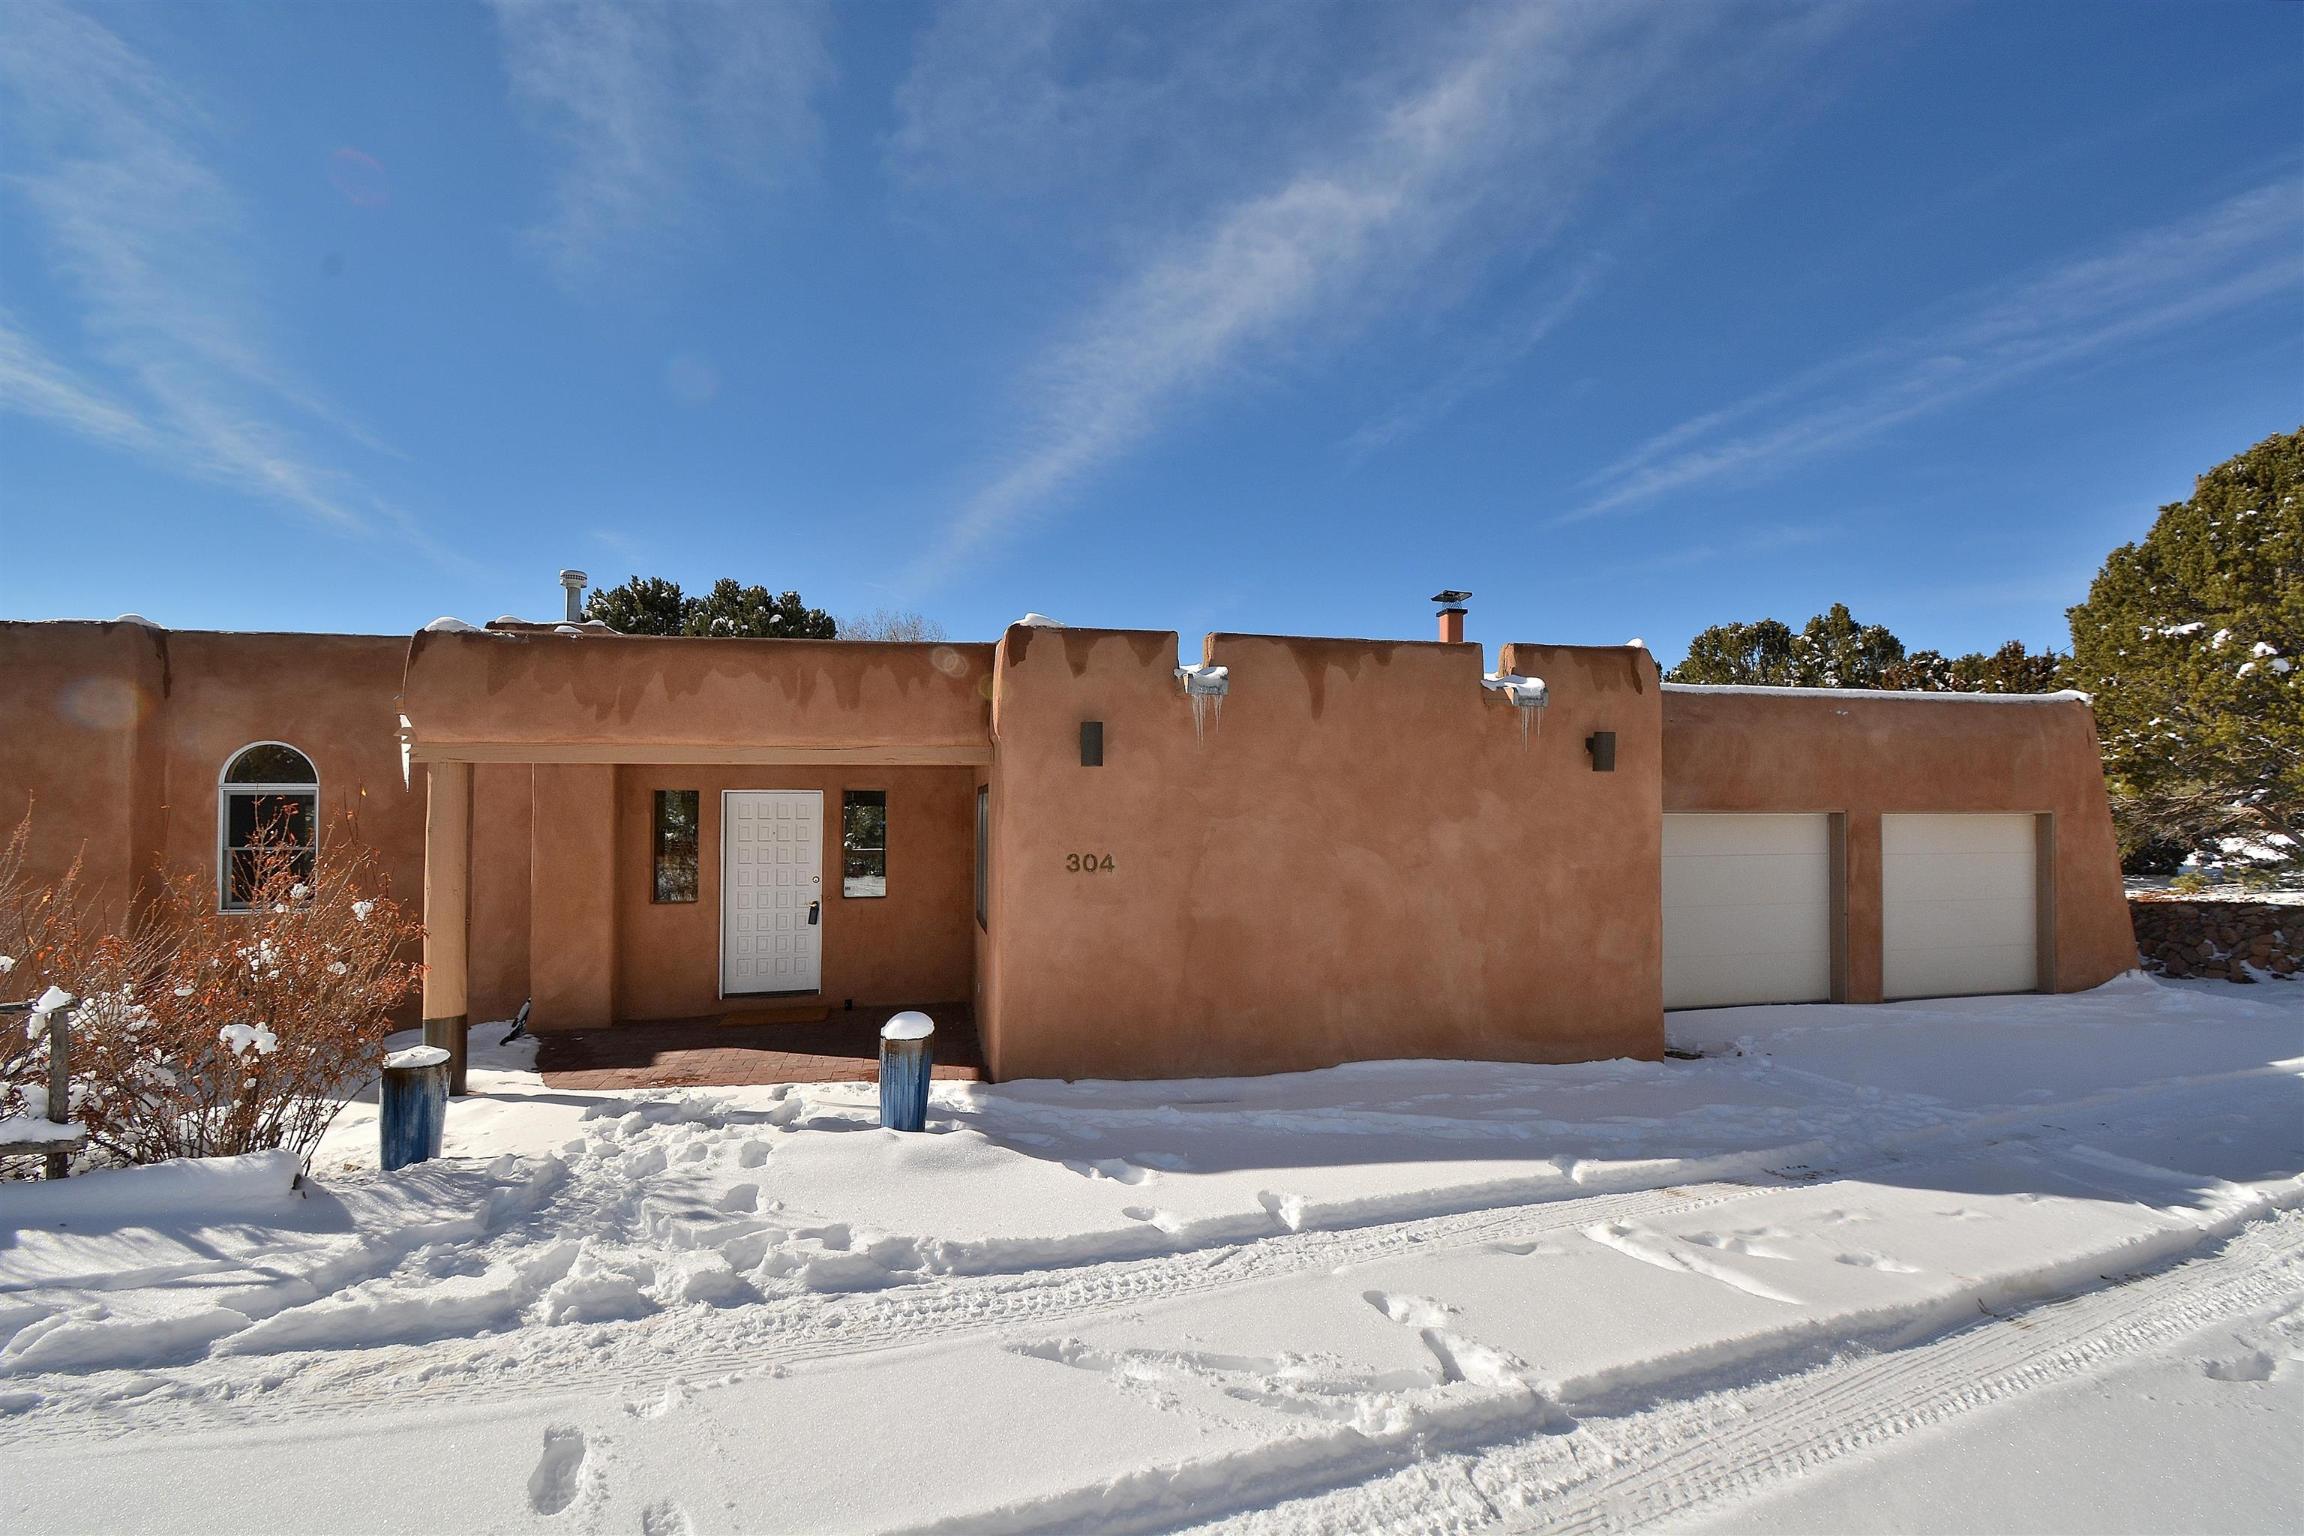 304 CALLE OSO, Santa Fe, New Mexico 87501, 3 Bedrooms Bedrooms, ,2 BathroomsBathrooms,Residential,For Sale,304 CALLE OSO,202105081